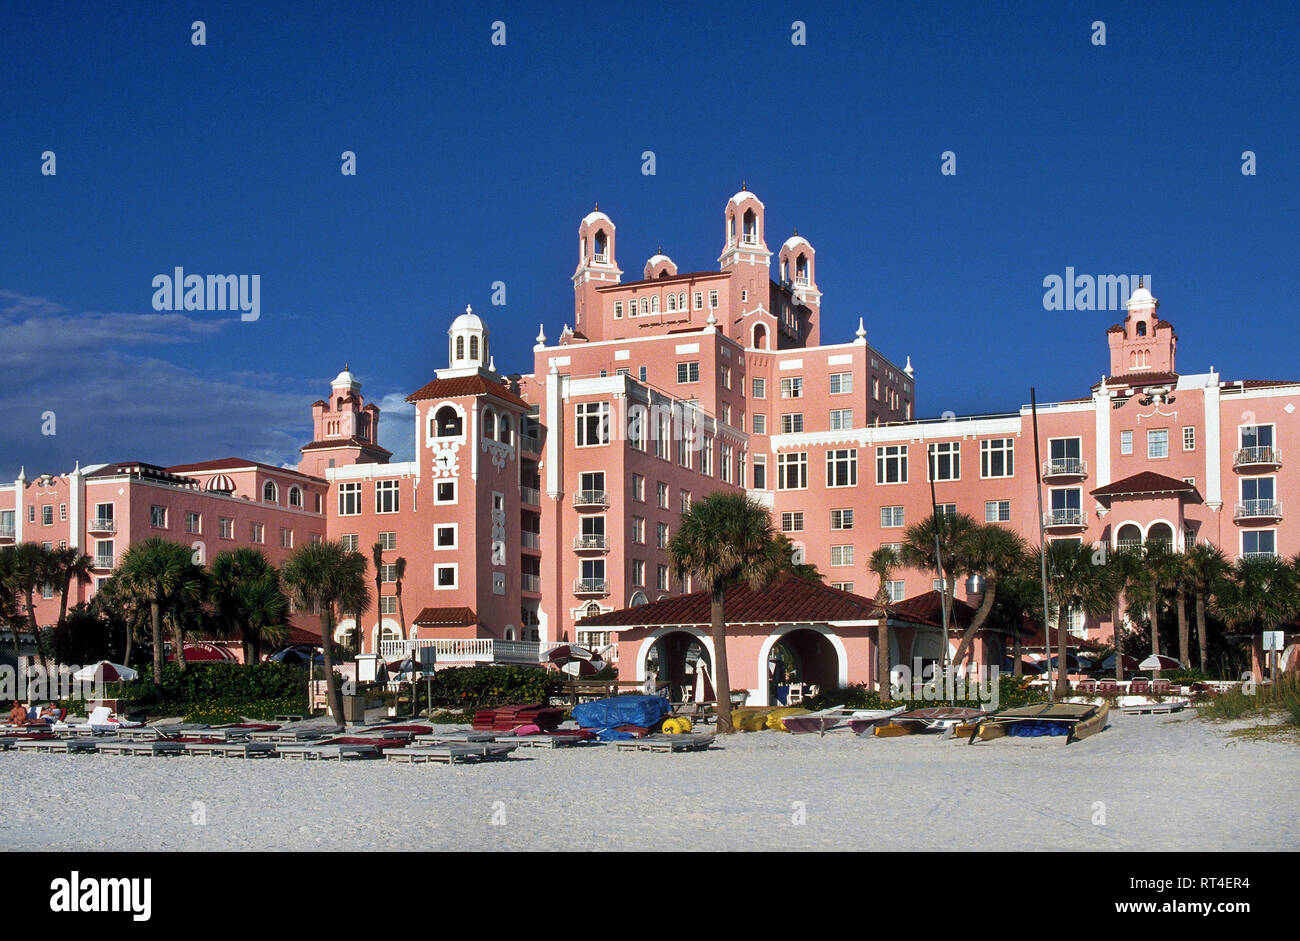 Appropriately called the Pink Palace, The Don Cesar is a splendid beach resort and spa that sprawls along a sandy shore of the Gulf of Mexico at St. Pete Beach on the west coast of  Florida, USA. Celebrities and other members of high society flocked to the landmark lodging in the Tampa Bay area when it opened in 1928 during the Sunshine State's early boom years. Beginning in 1942 the grand hotel was used as a hospital and convalescent center for wounded World War II soldiers before falling into disrepair. New owners in 1973 restored the towered nine-story hoitel to its former glory. Stock Photo